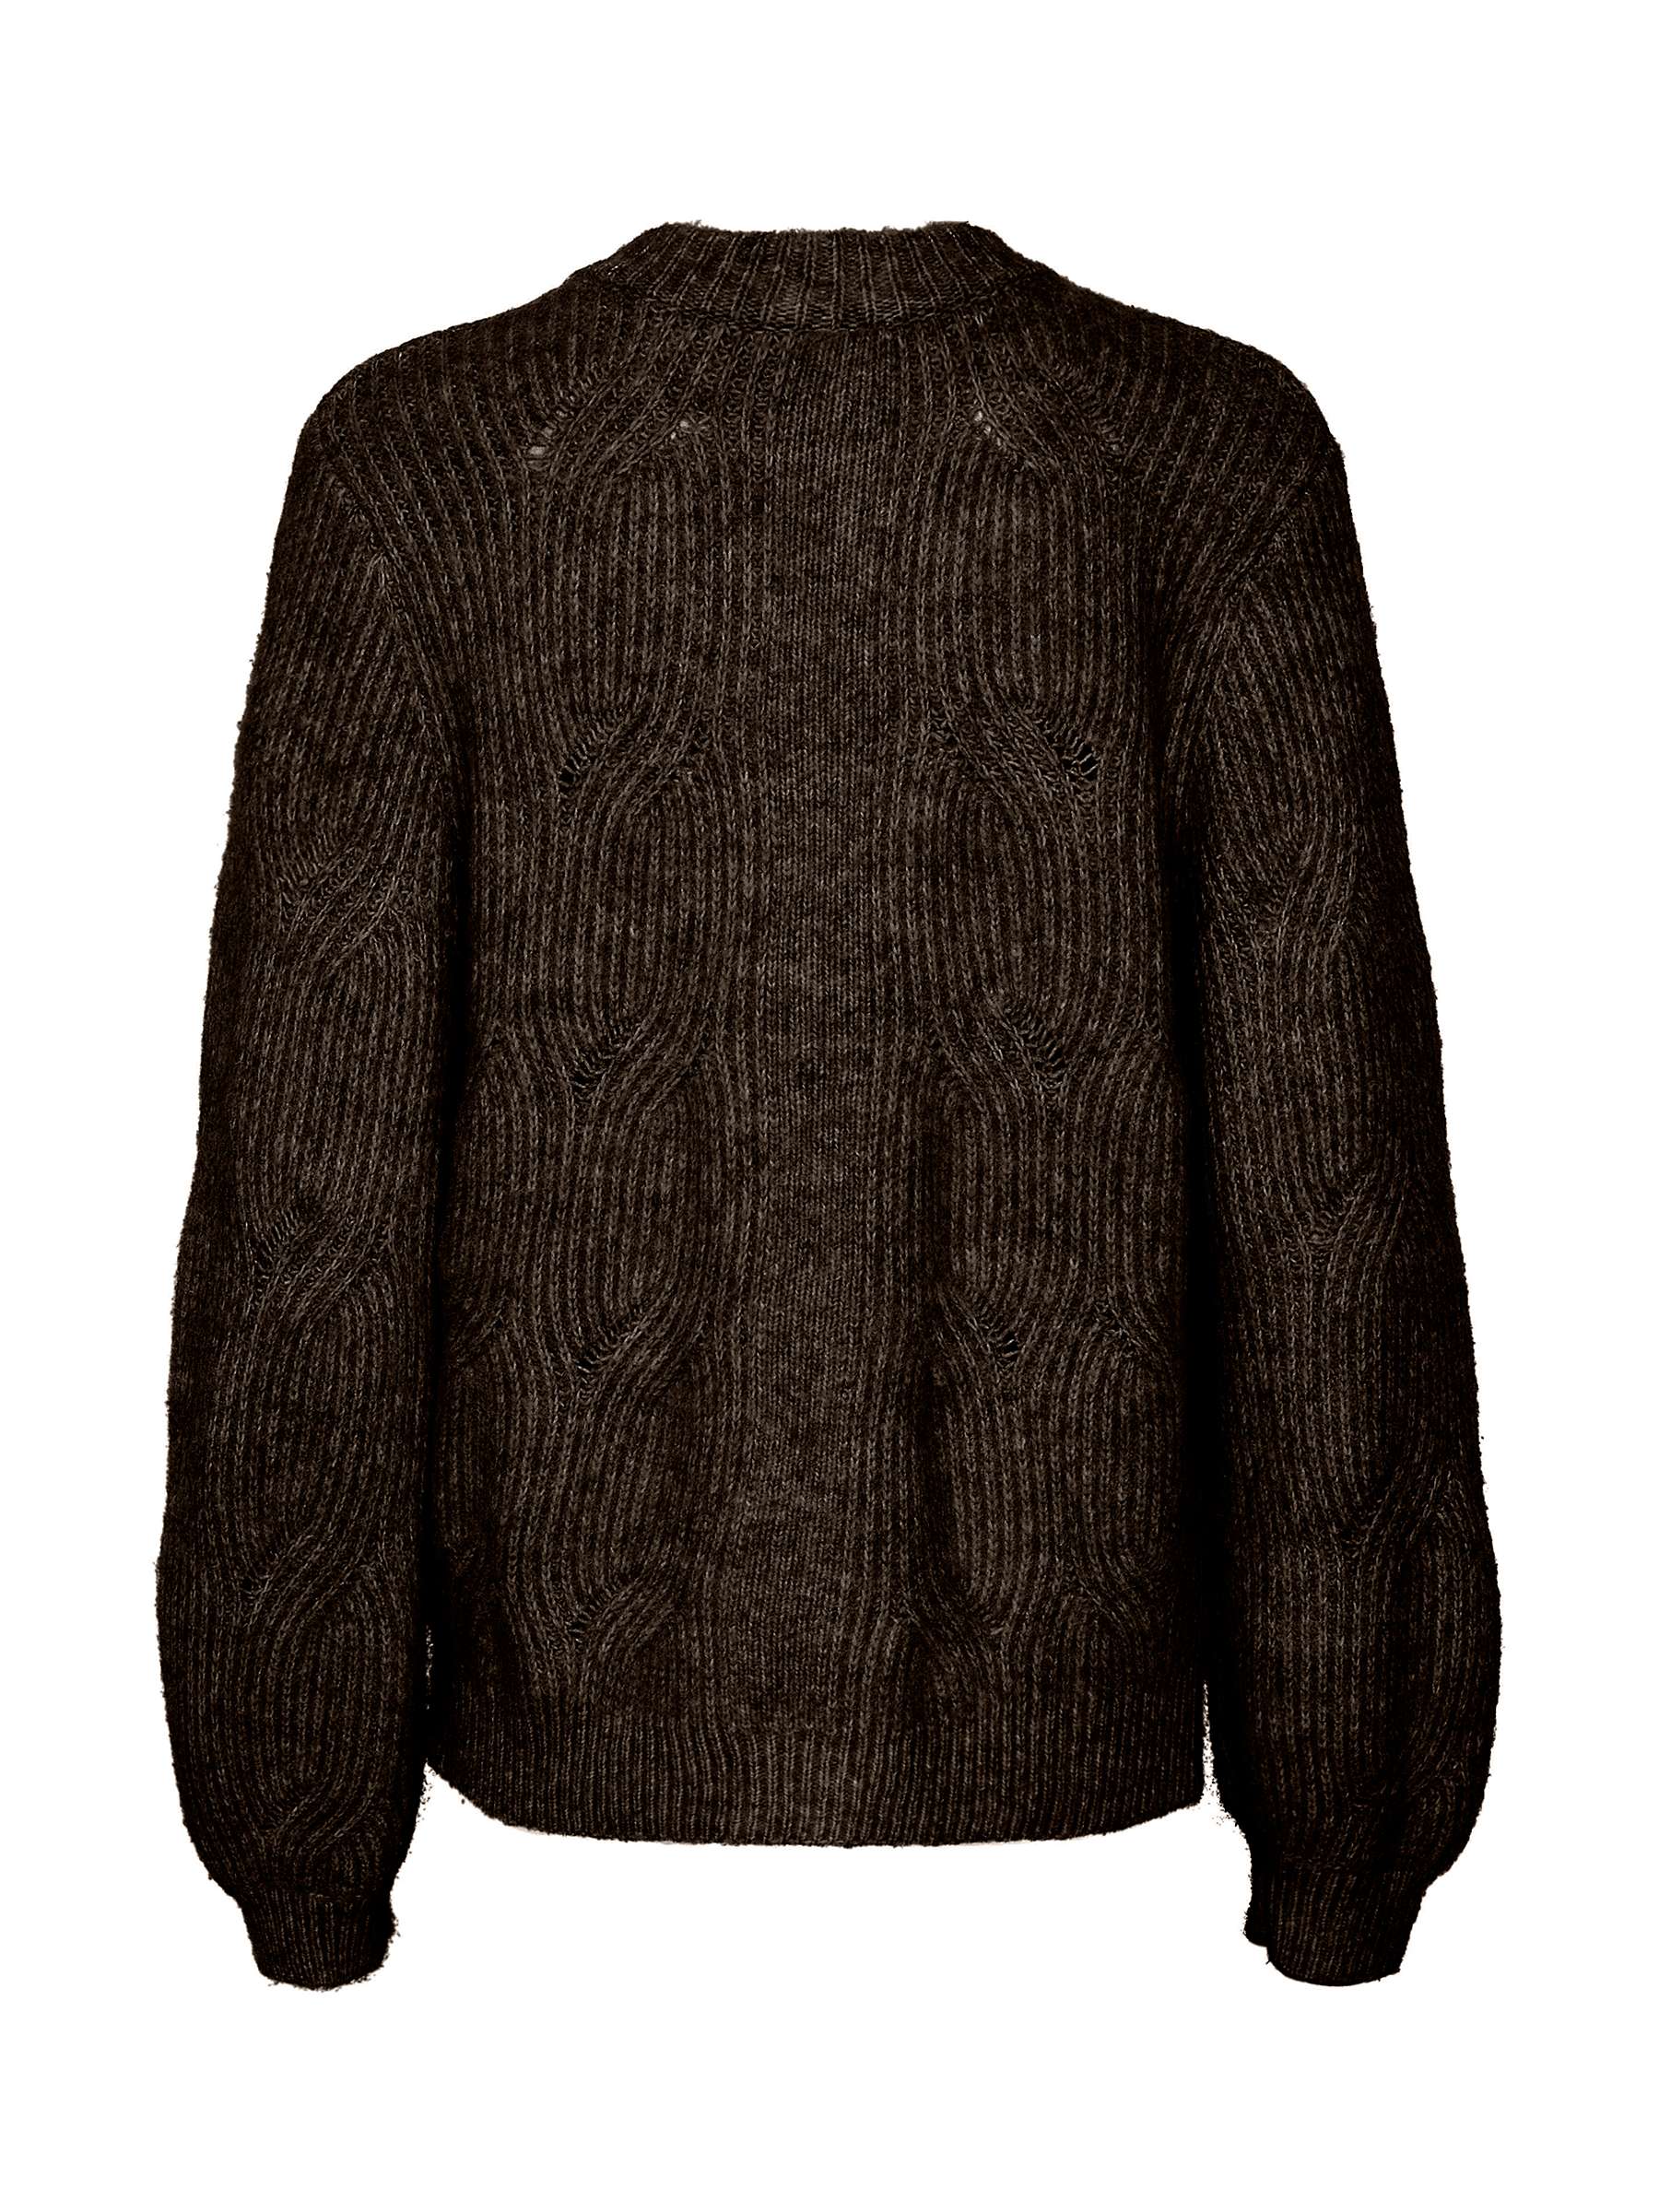 Saint Tropez Arabella Cable Knit Button Cardigan, Chocolate Brown at ...